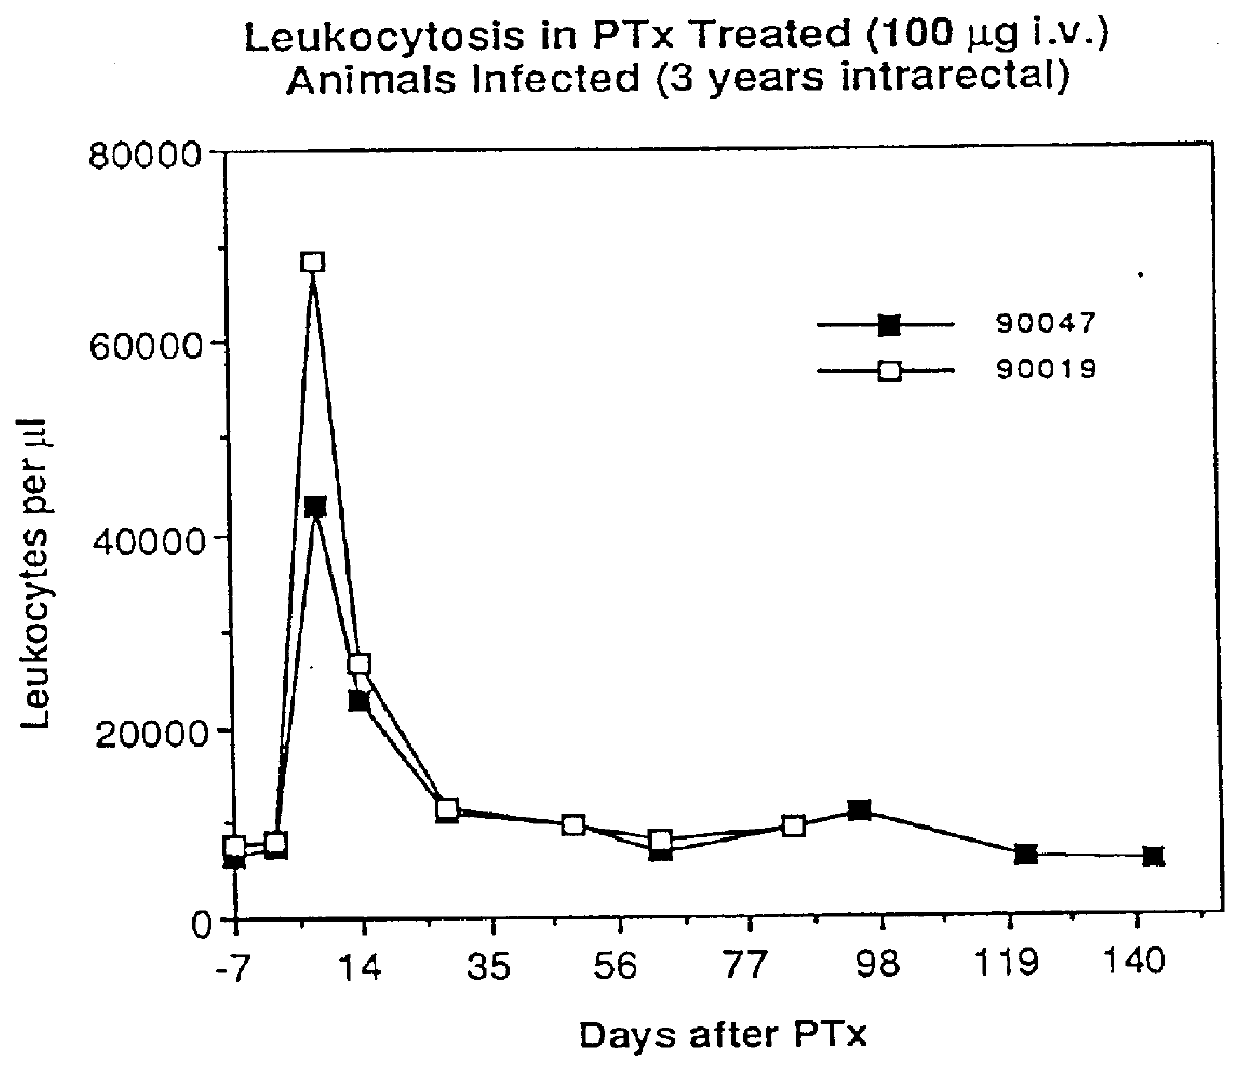 Pertussis toxin induced lymphocytosis